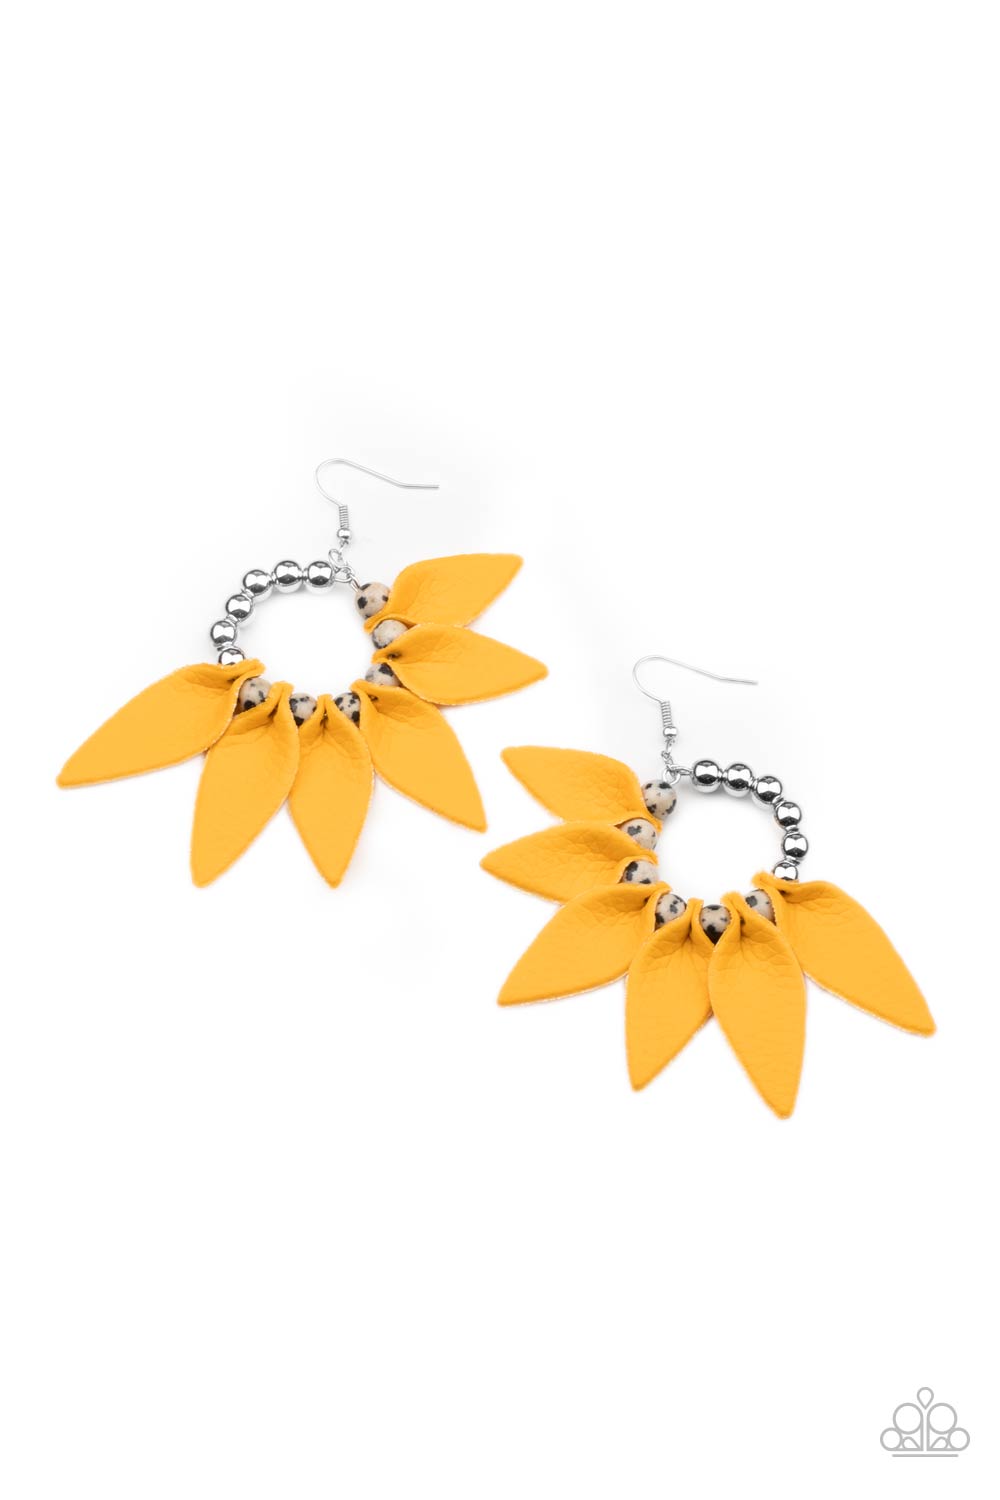 Flower Child Fever Yellow Leather Earrings - Paparazzi Accessories- lightbox - CarasShop.com - $5 Jewelry by Cara Jewels